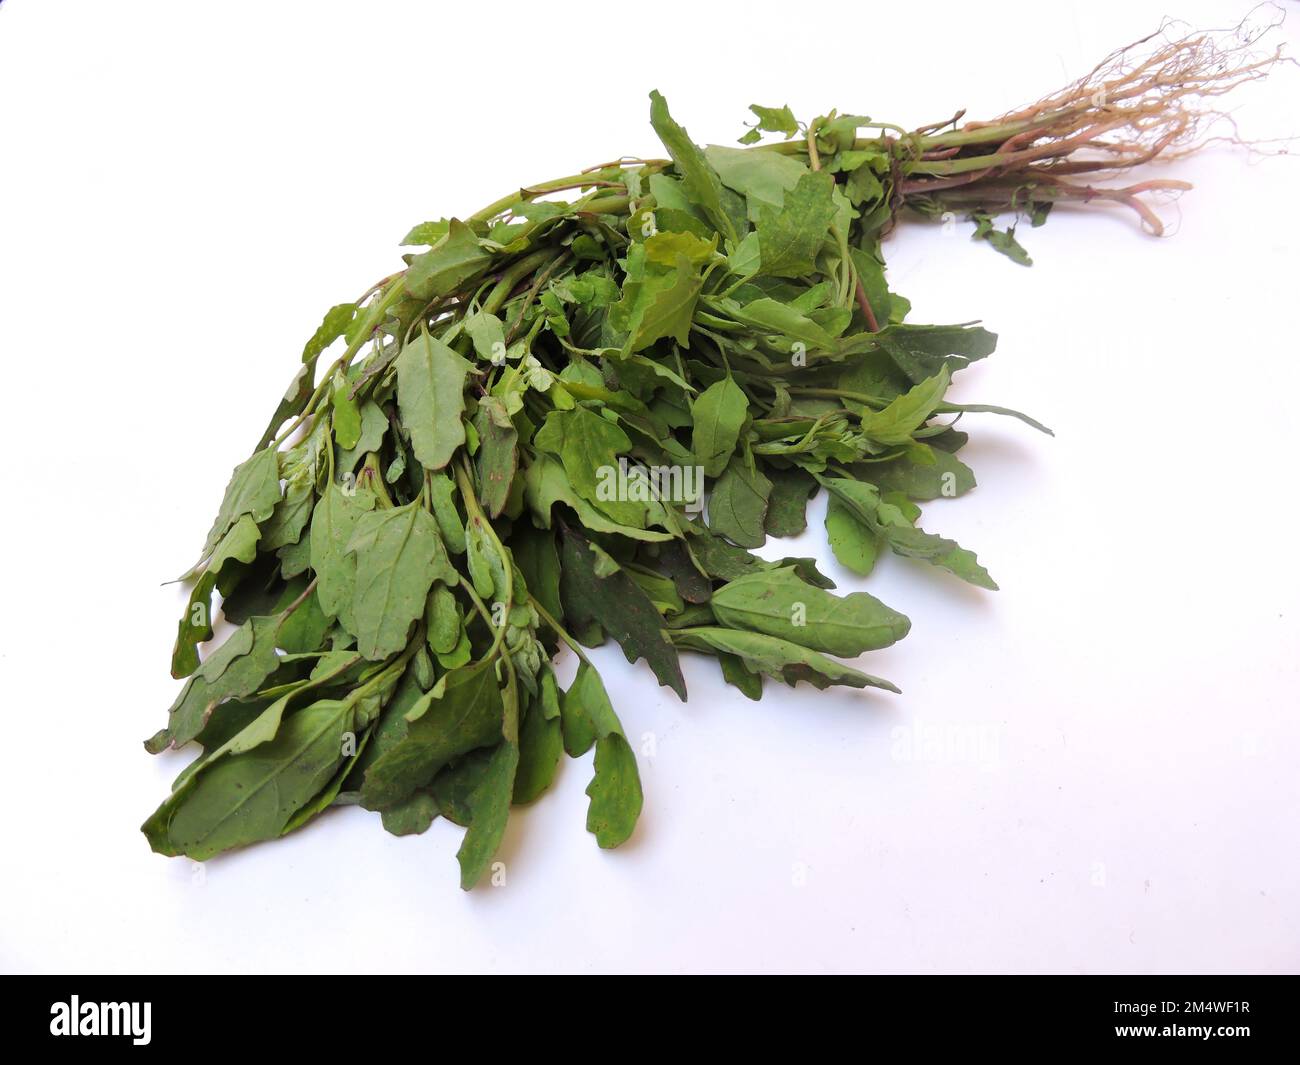 Leafy vegetable - White goose foot. Scientific name - Chenopodium album. It is extensively cultivated and consumed in North and Northeast India. Stock Photo